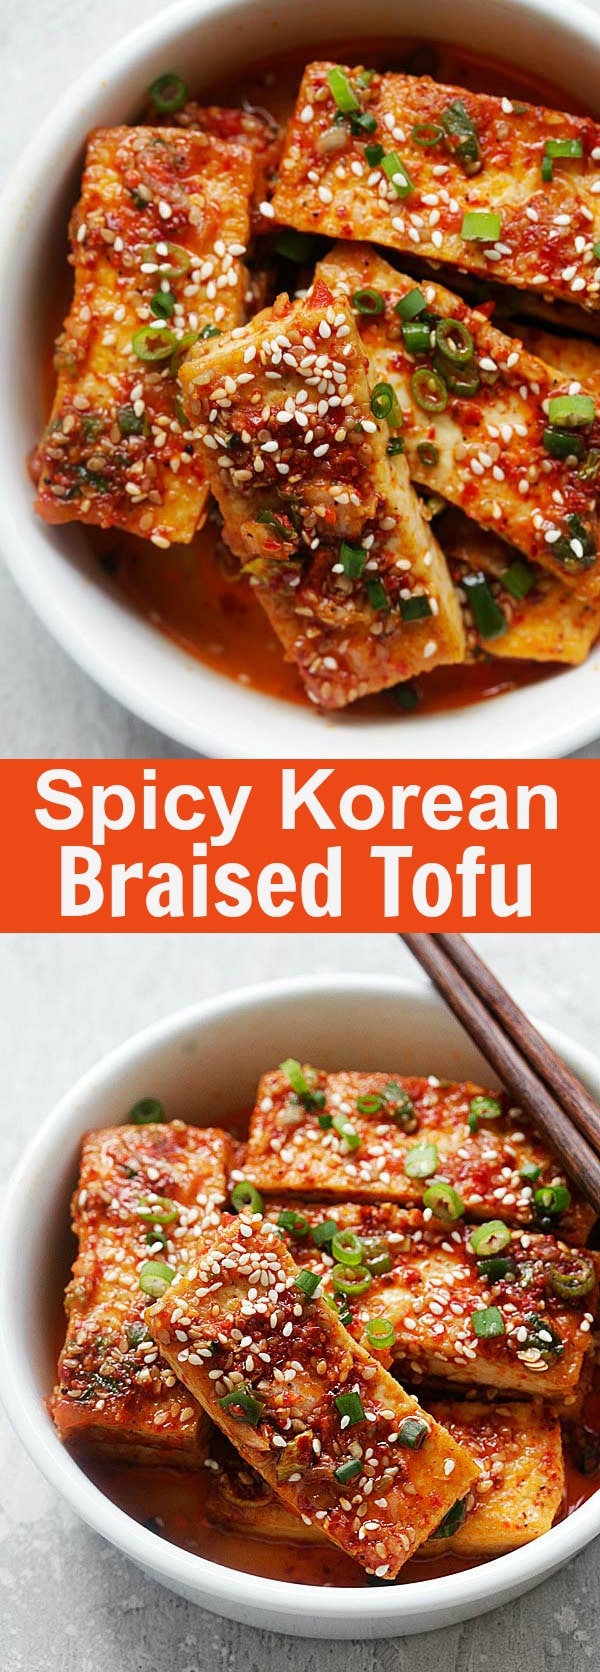 Spicy Korean Tofu - quick and easy Korean braised tofu with chili powder, garlic, soy sauce, sugar and sesame oil. This Korean side dish (banchan) is healthy and delicious | rasamalaysia.com